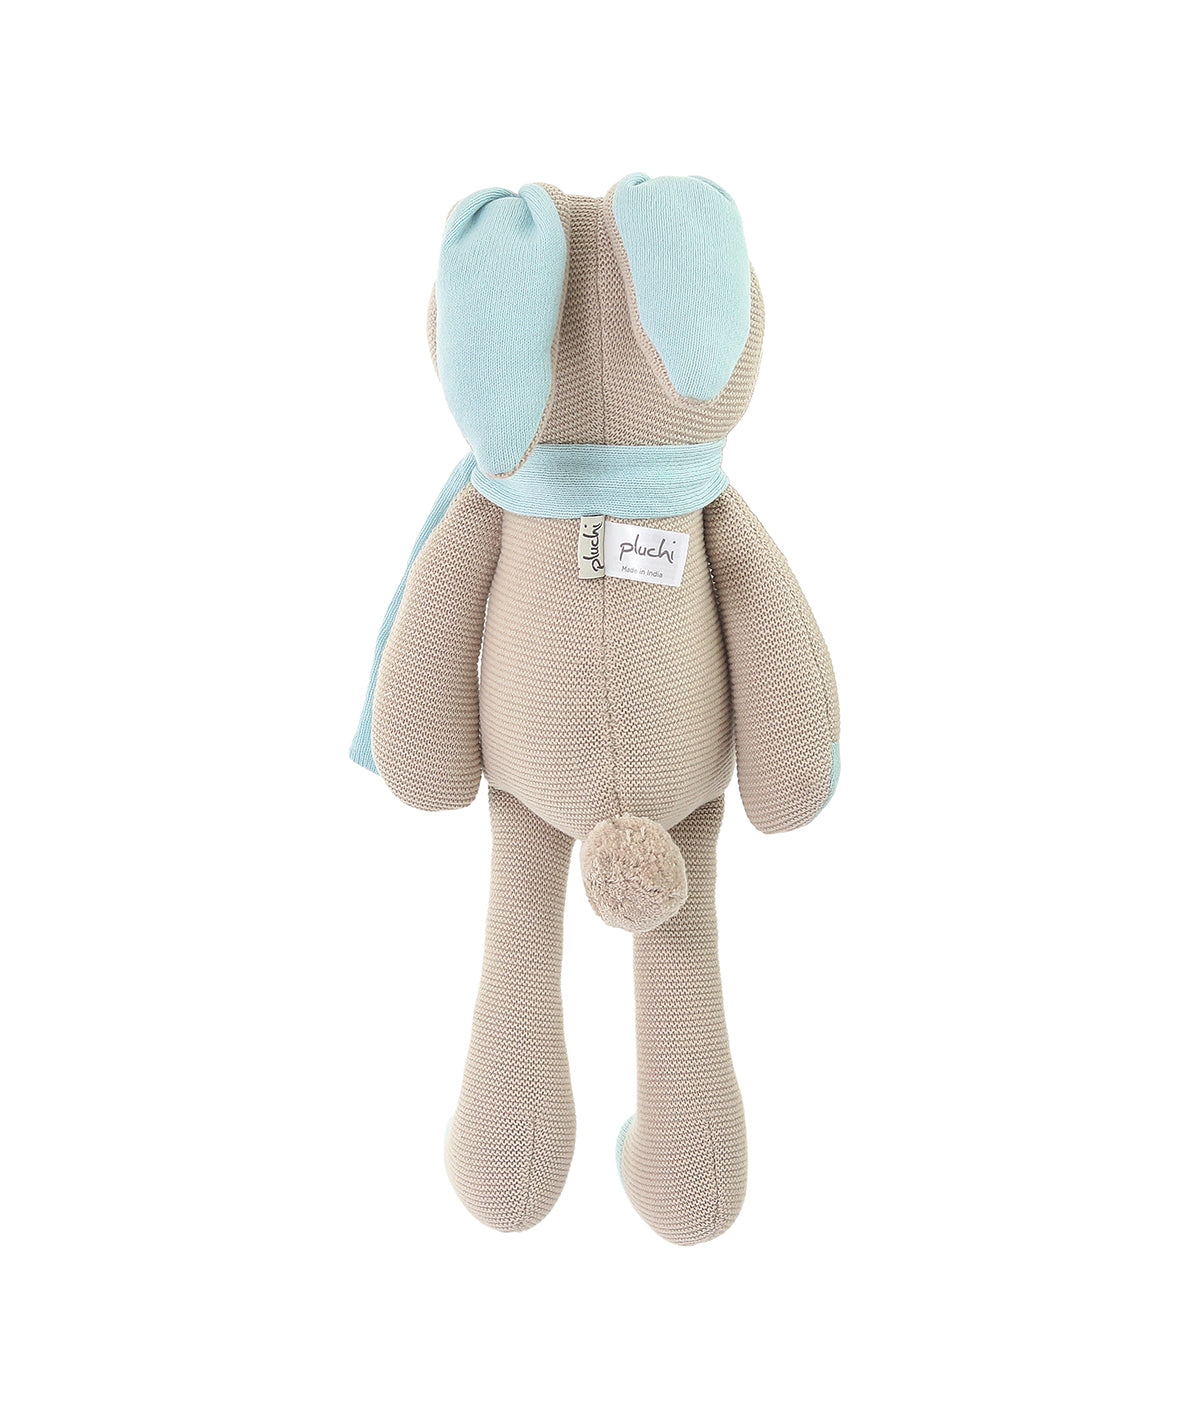 Berry Bunny Cotton Knitted Stuffed Soft Toy (Pale Whisper & Baby Blue)